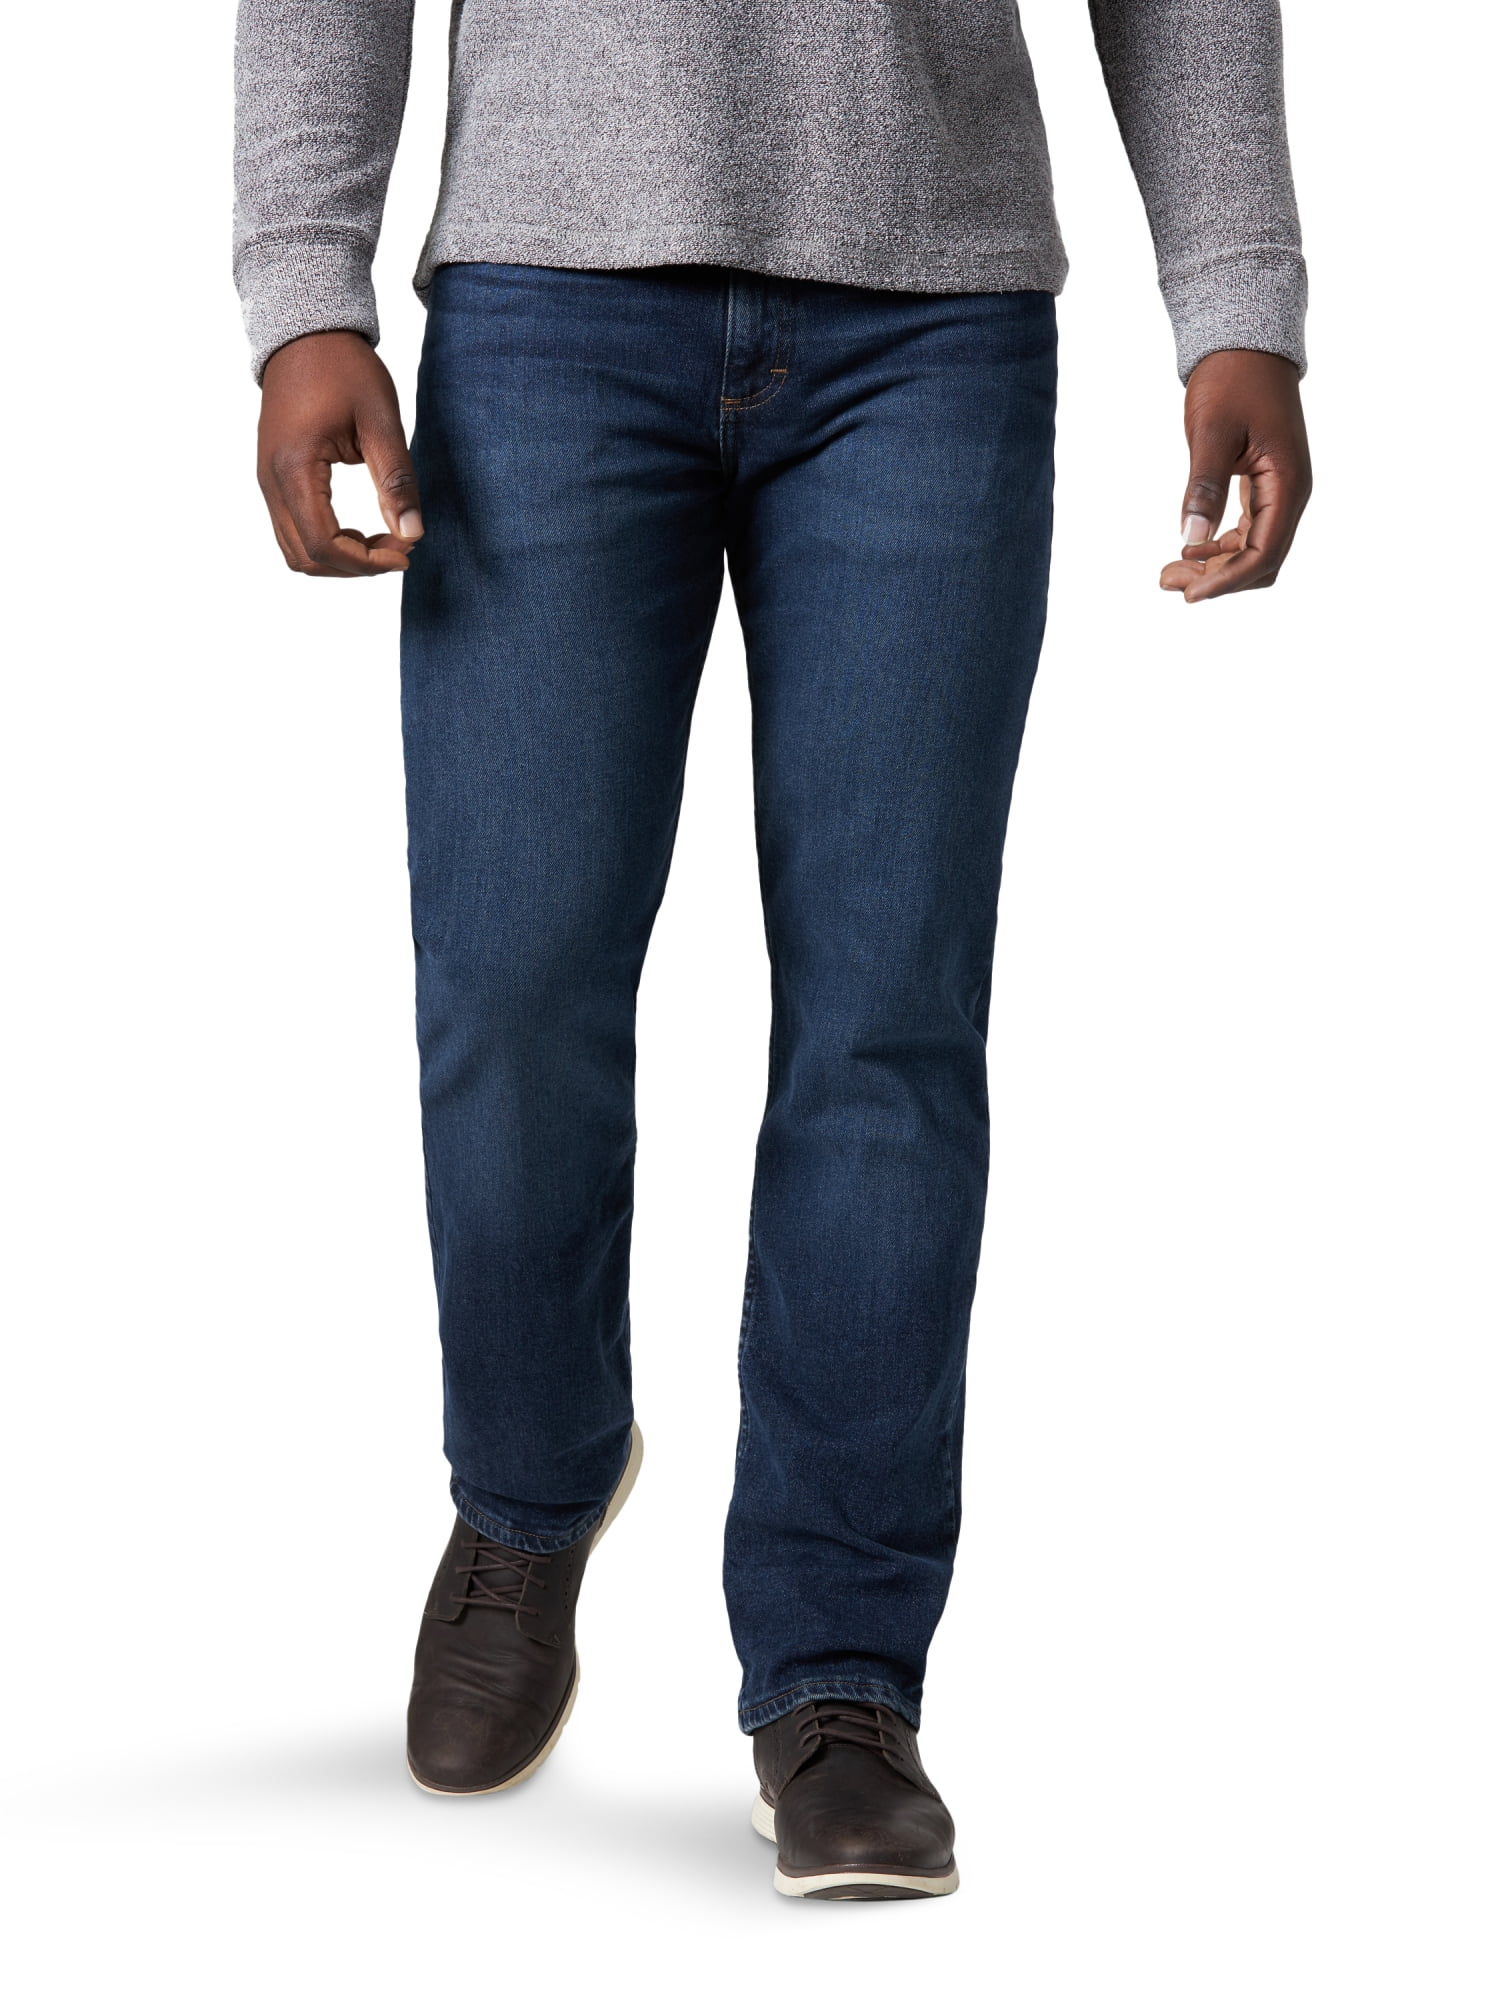 Wrangler Men's and Big Relaxed Fit with Flex - Walmart.com